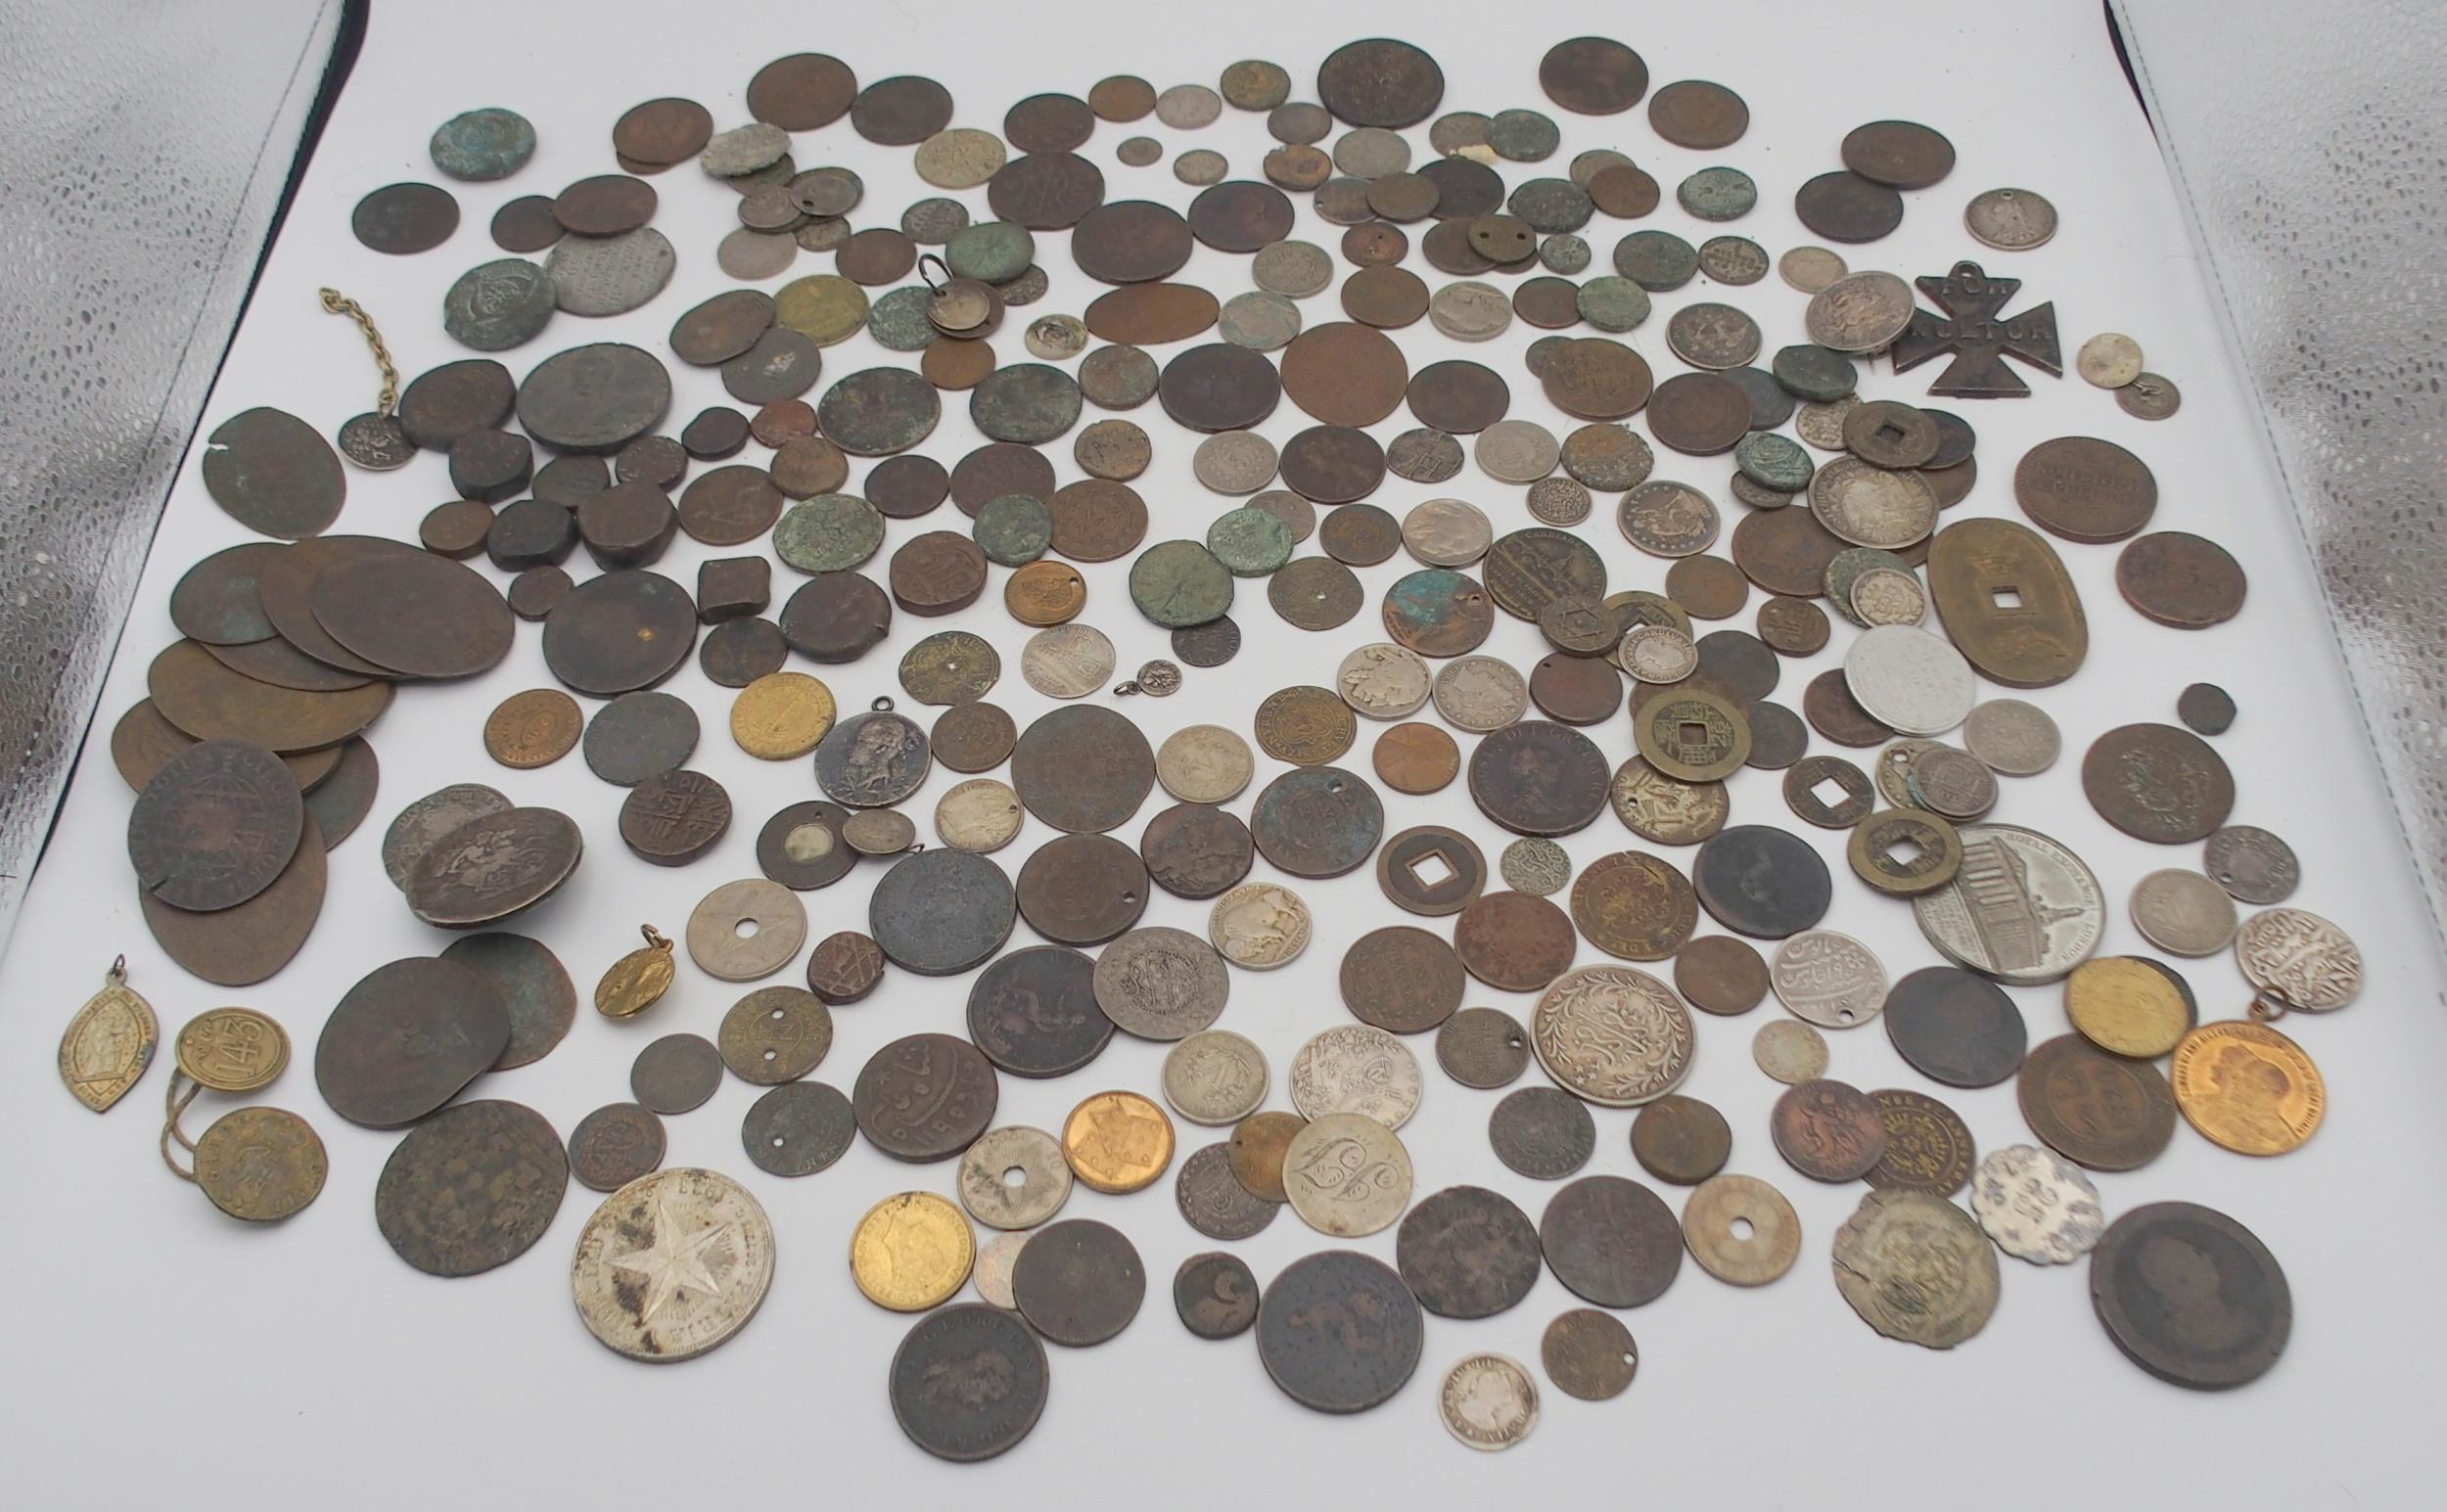 An interesting collection of coins with Chinese, Indian, Roman, Russian, U.S.A, Persian, British etc